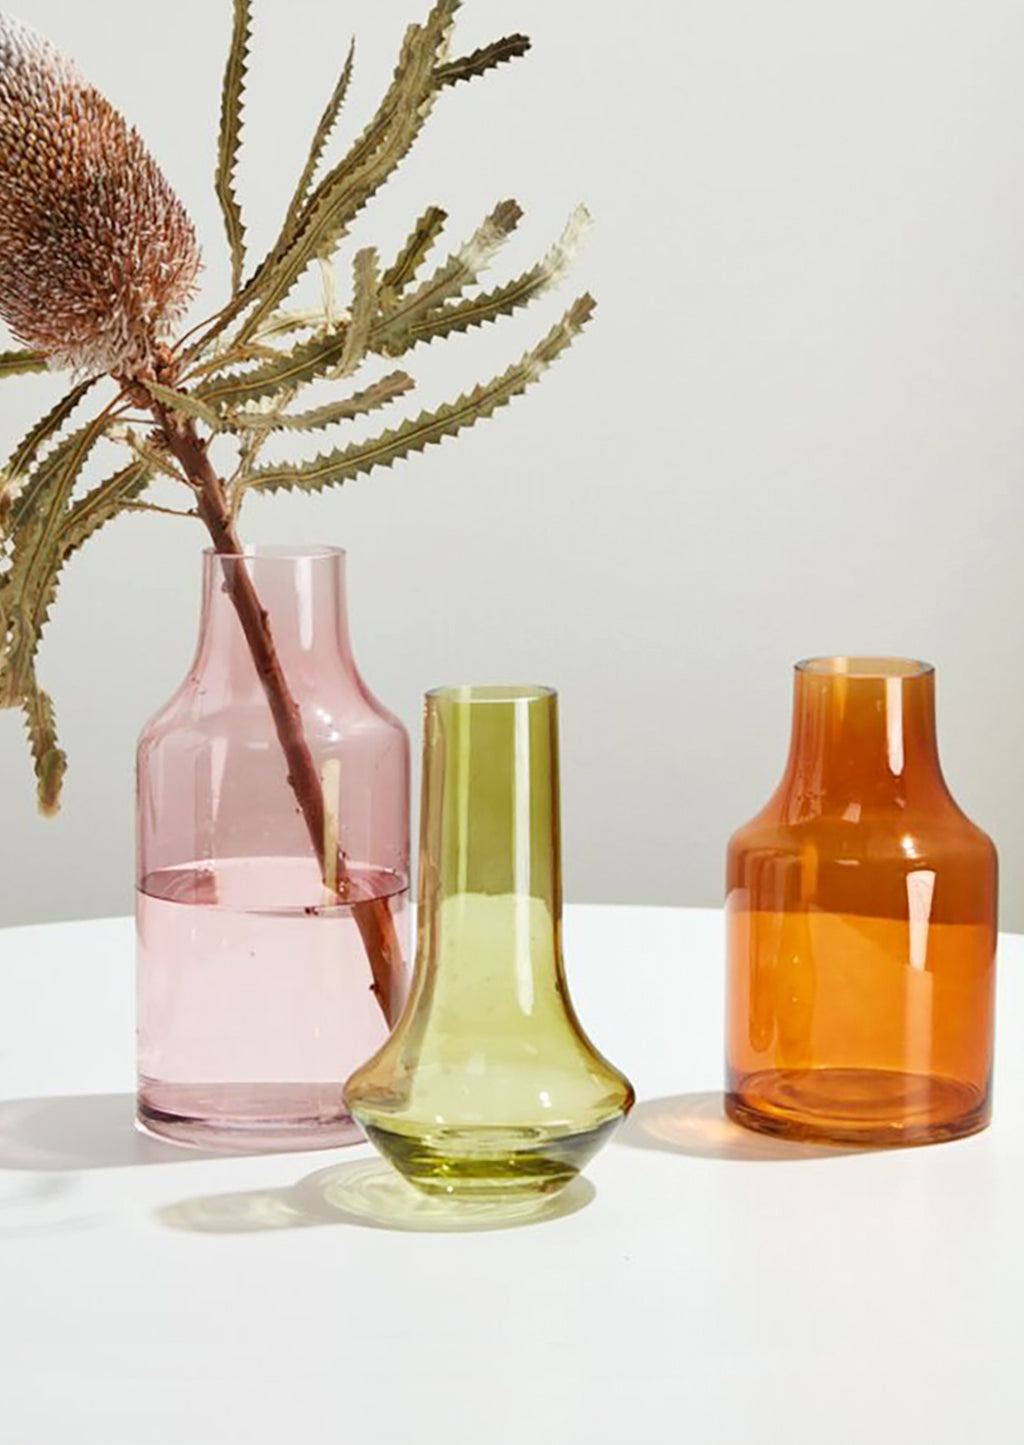 Amber: Three transparent glass vases in assorted colors and shapes.